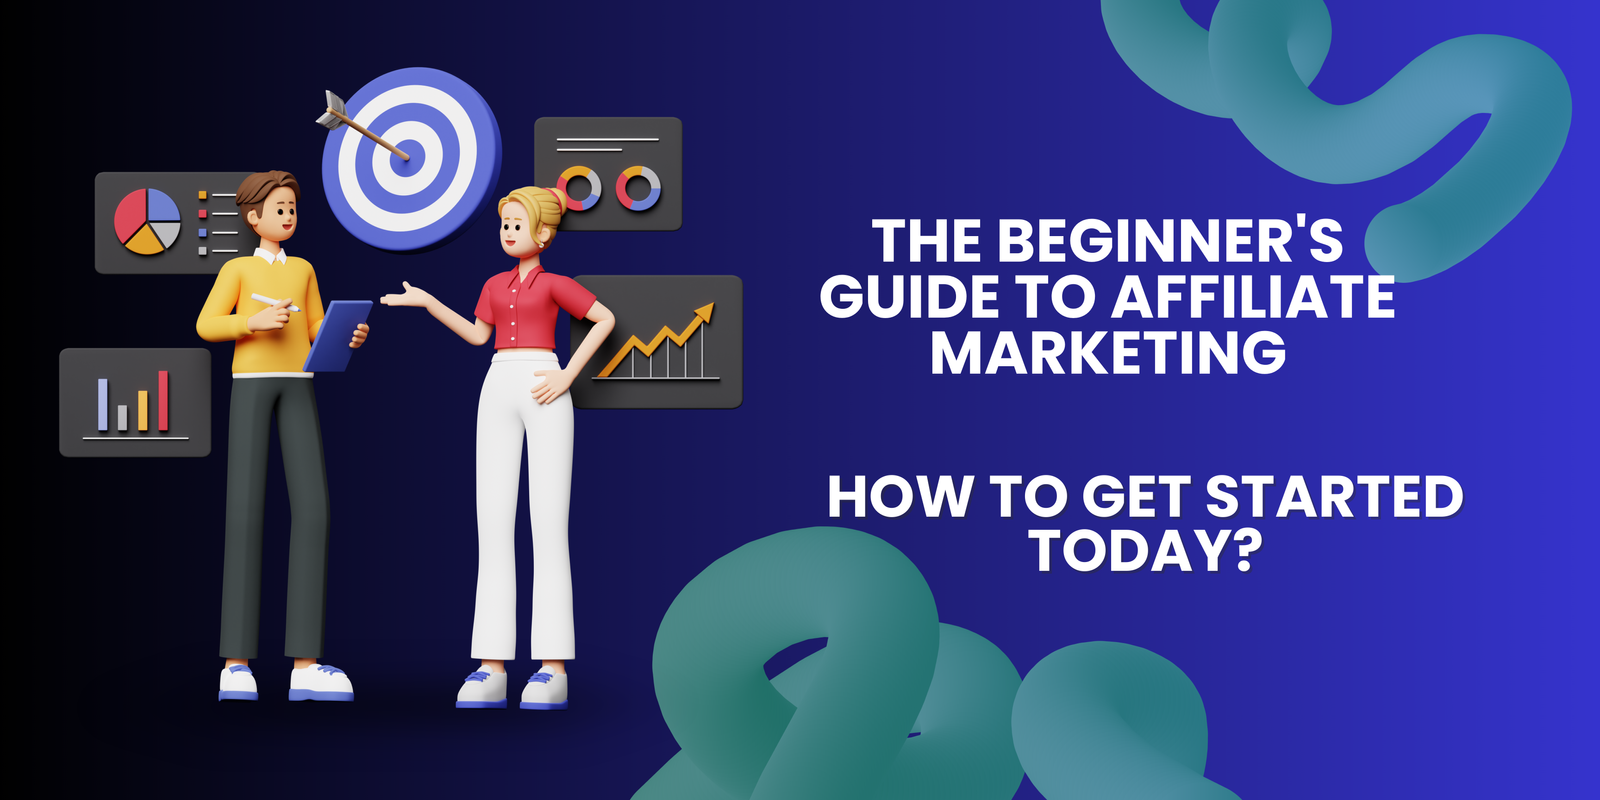 The Beginner’s Guide to Affiliate Marketing: How to Get Started Today?